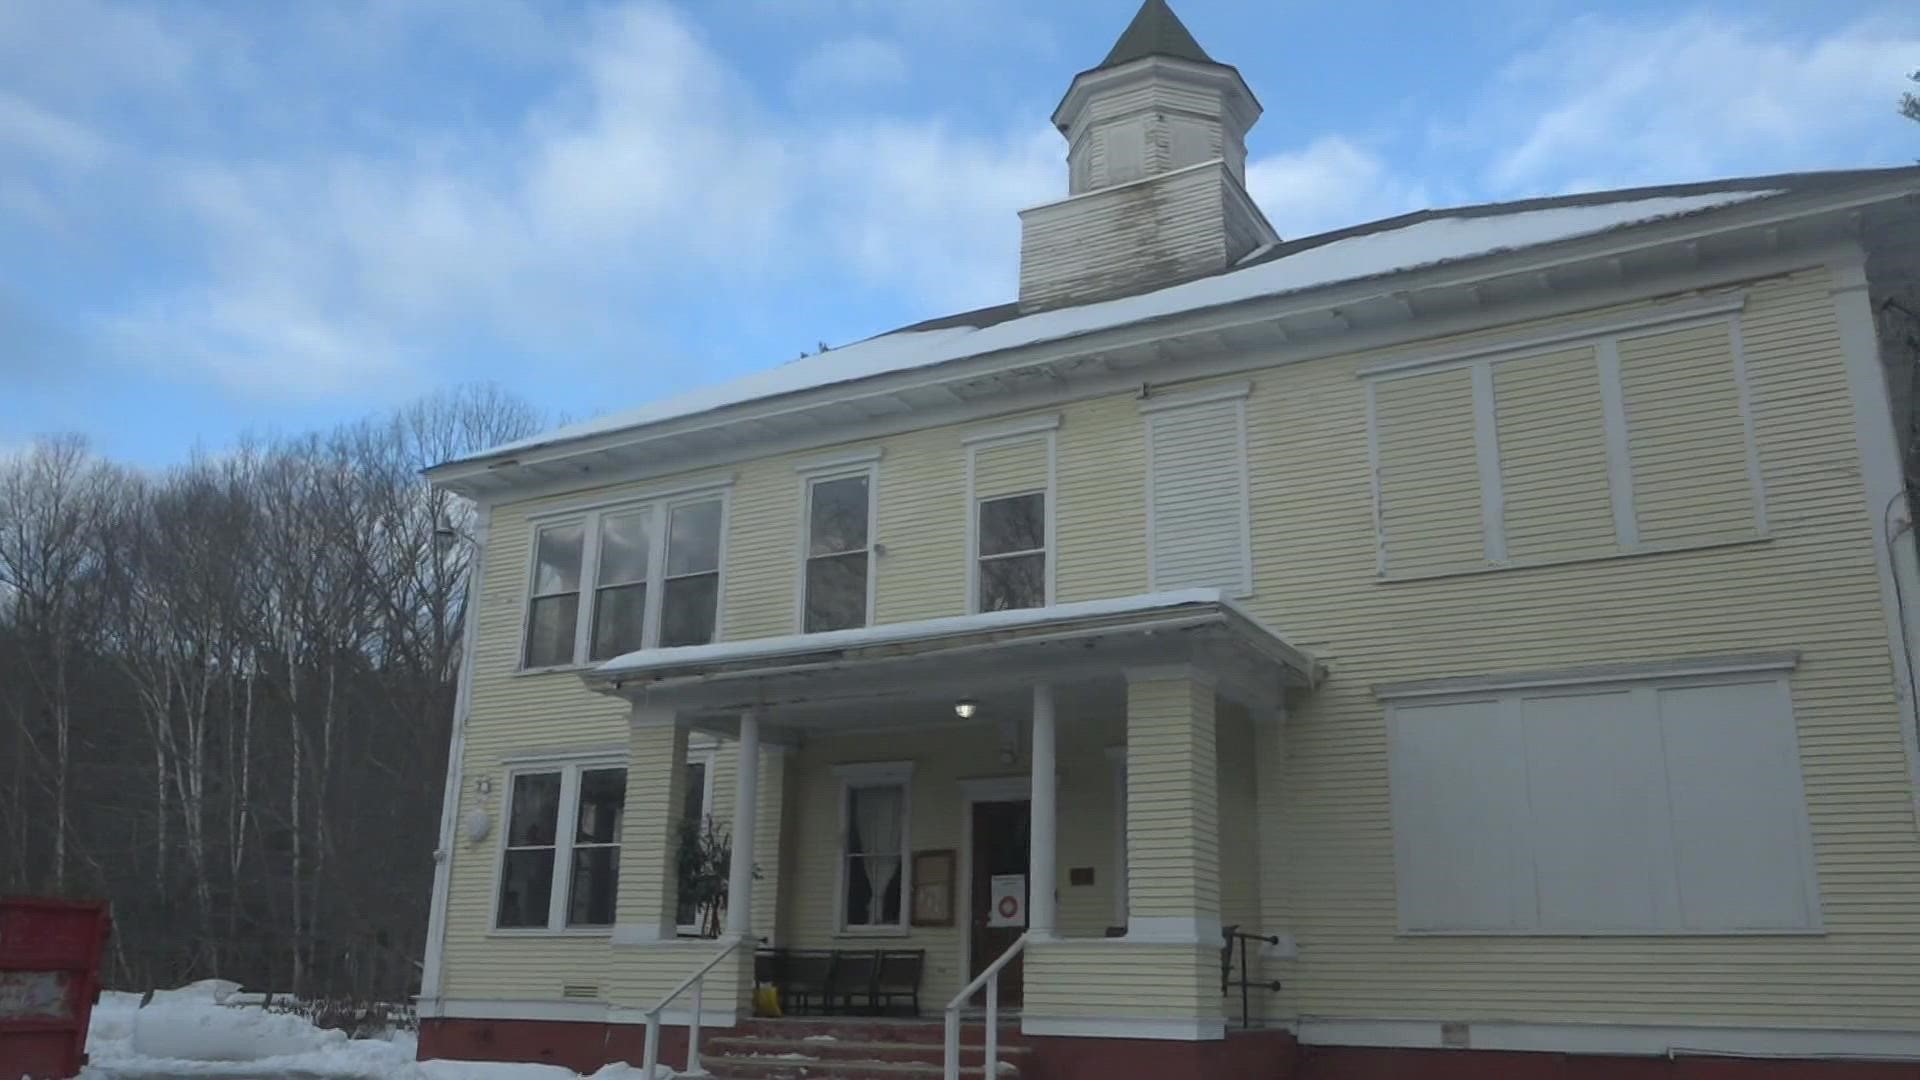 Schoolhouse Arts Center in Standish has been focusing on educating and entertaining its community for the last three decades, but the building is falling apart.